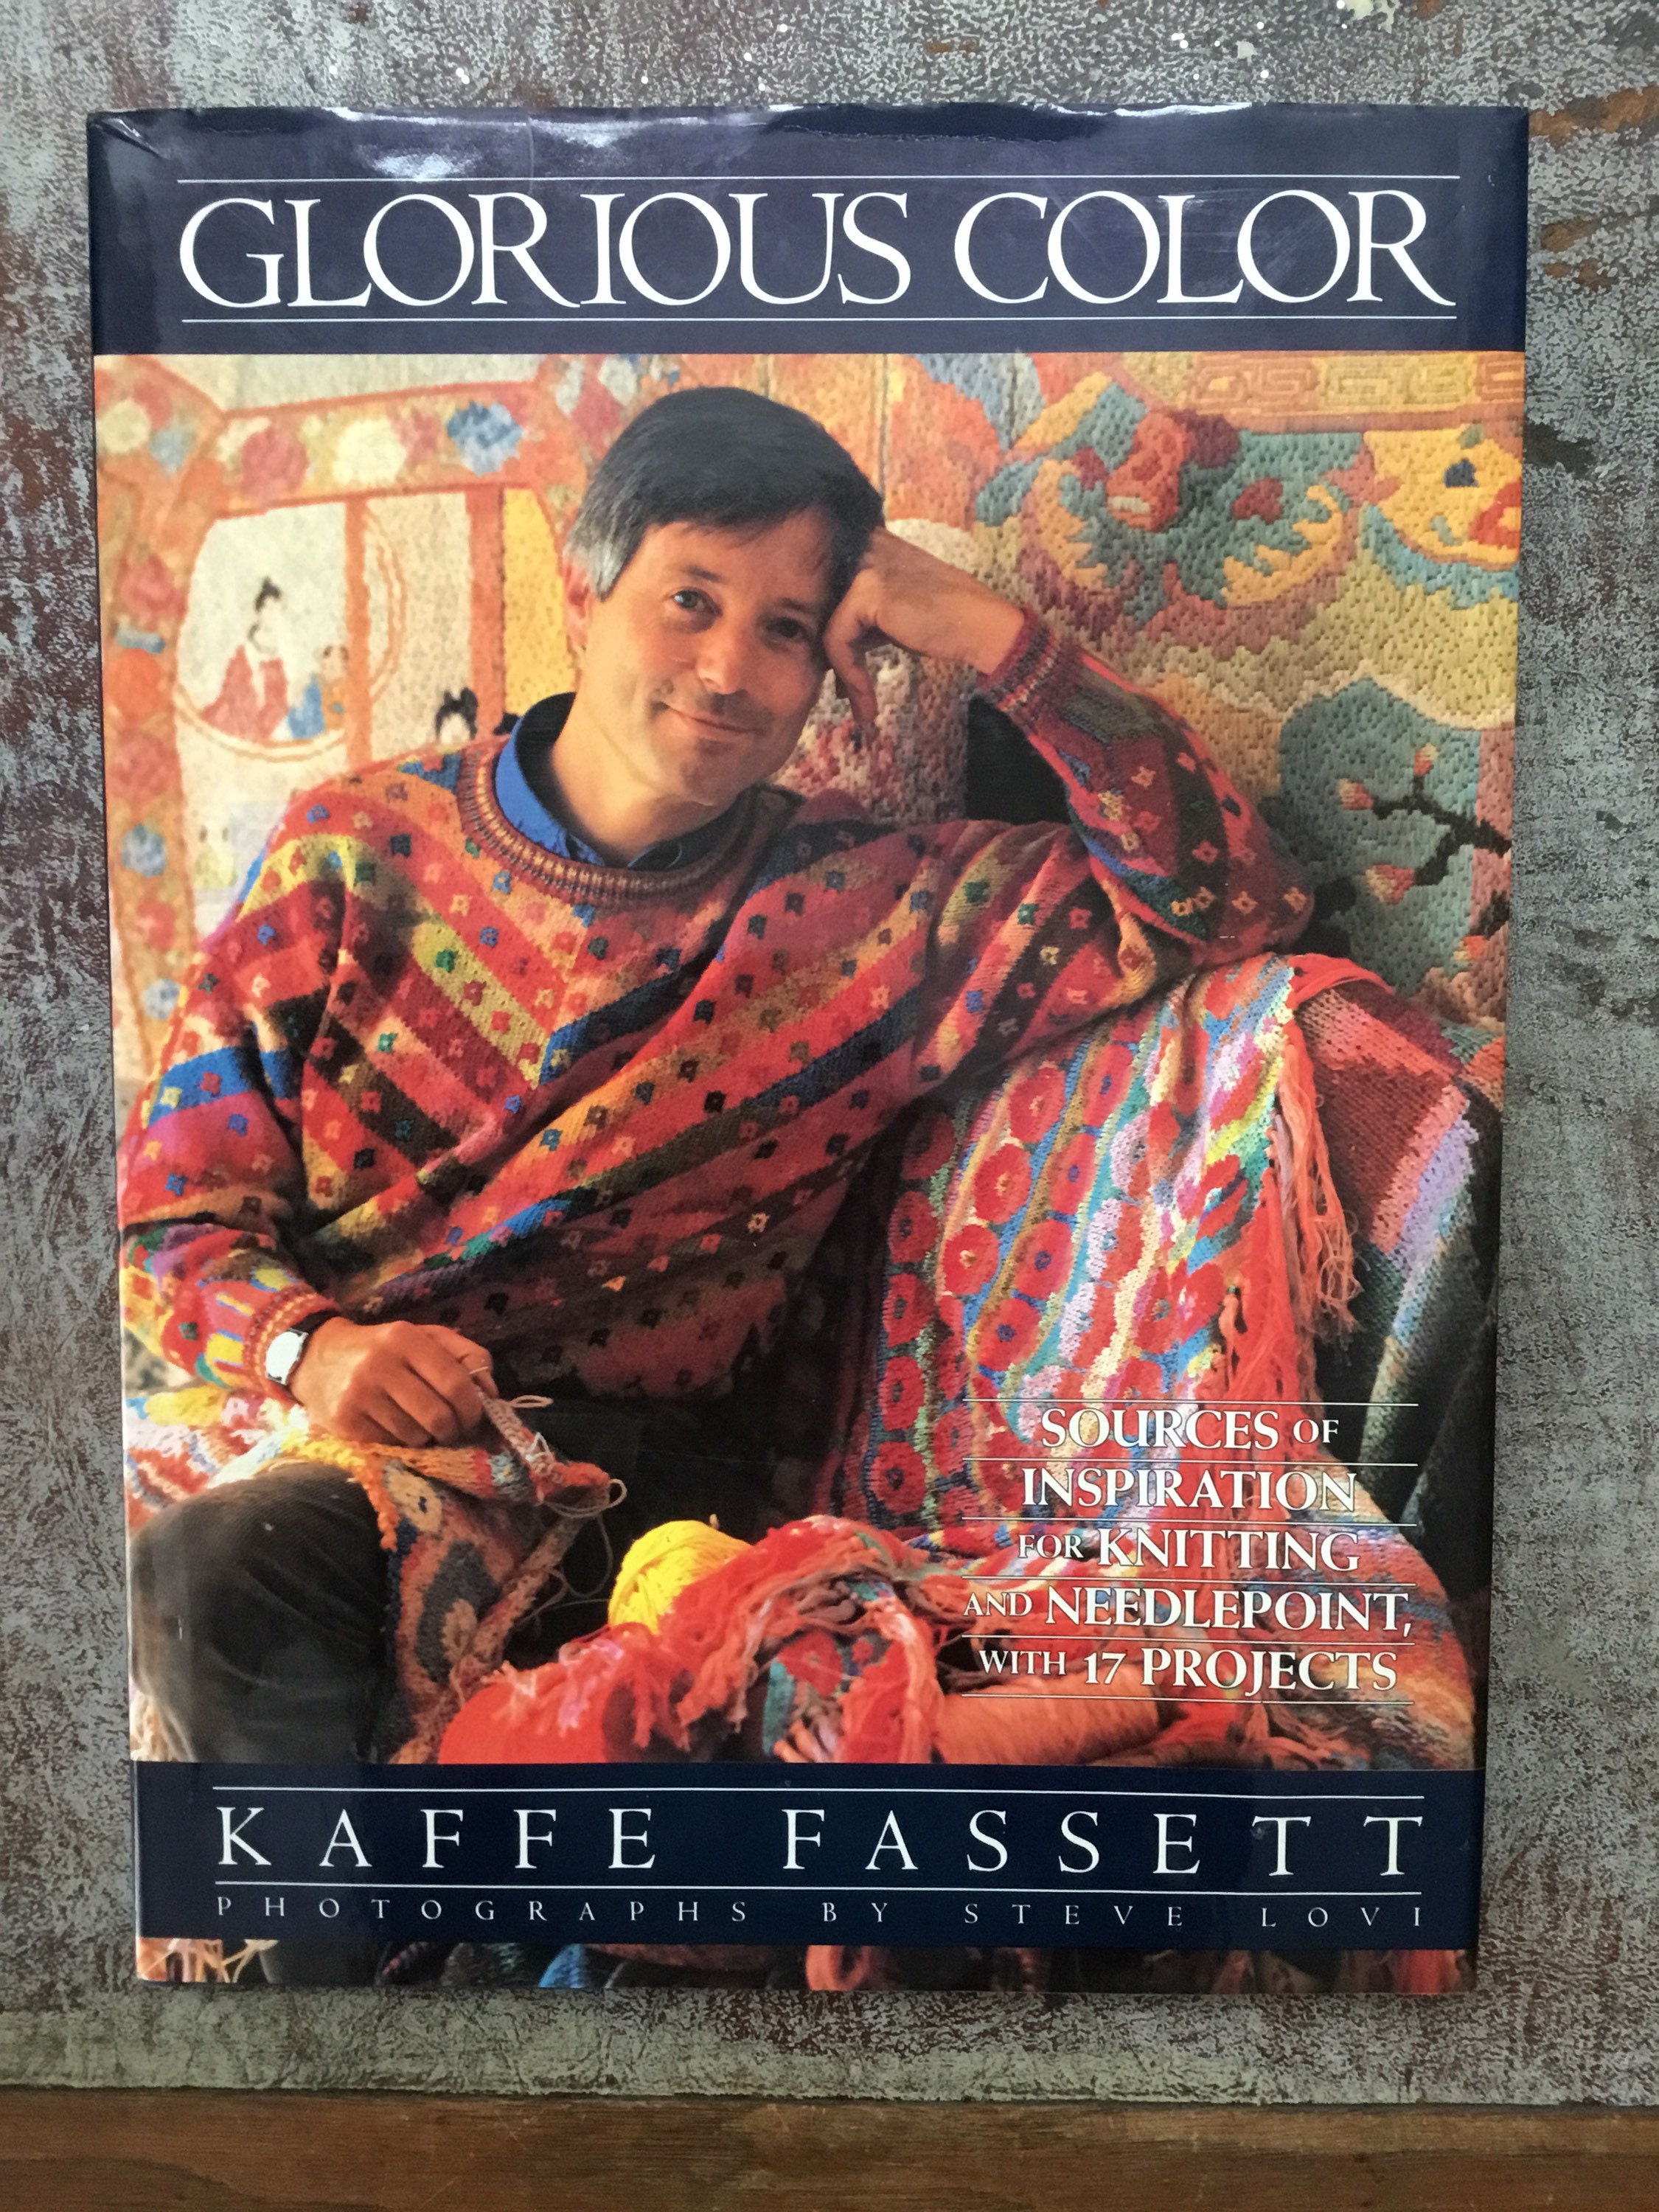 Glorious Color: Sources of Inspiration for Knitting and Needlepoint, with 17 Projects [Book]